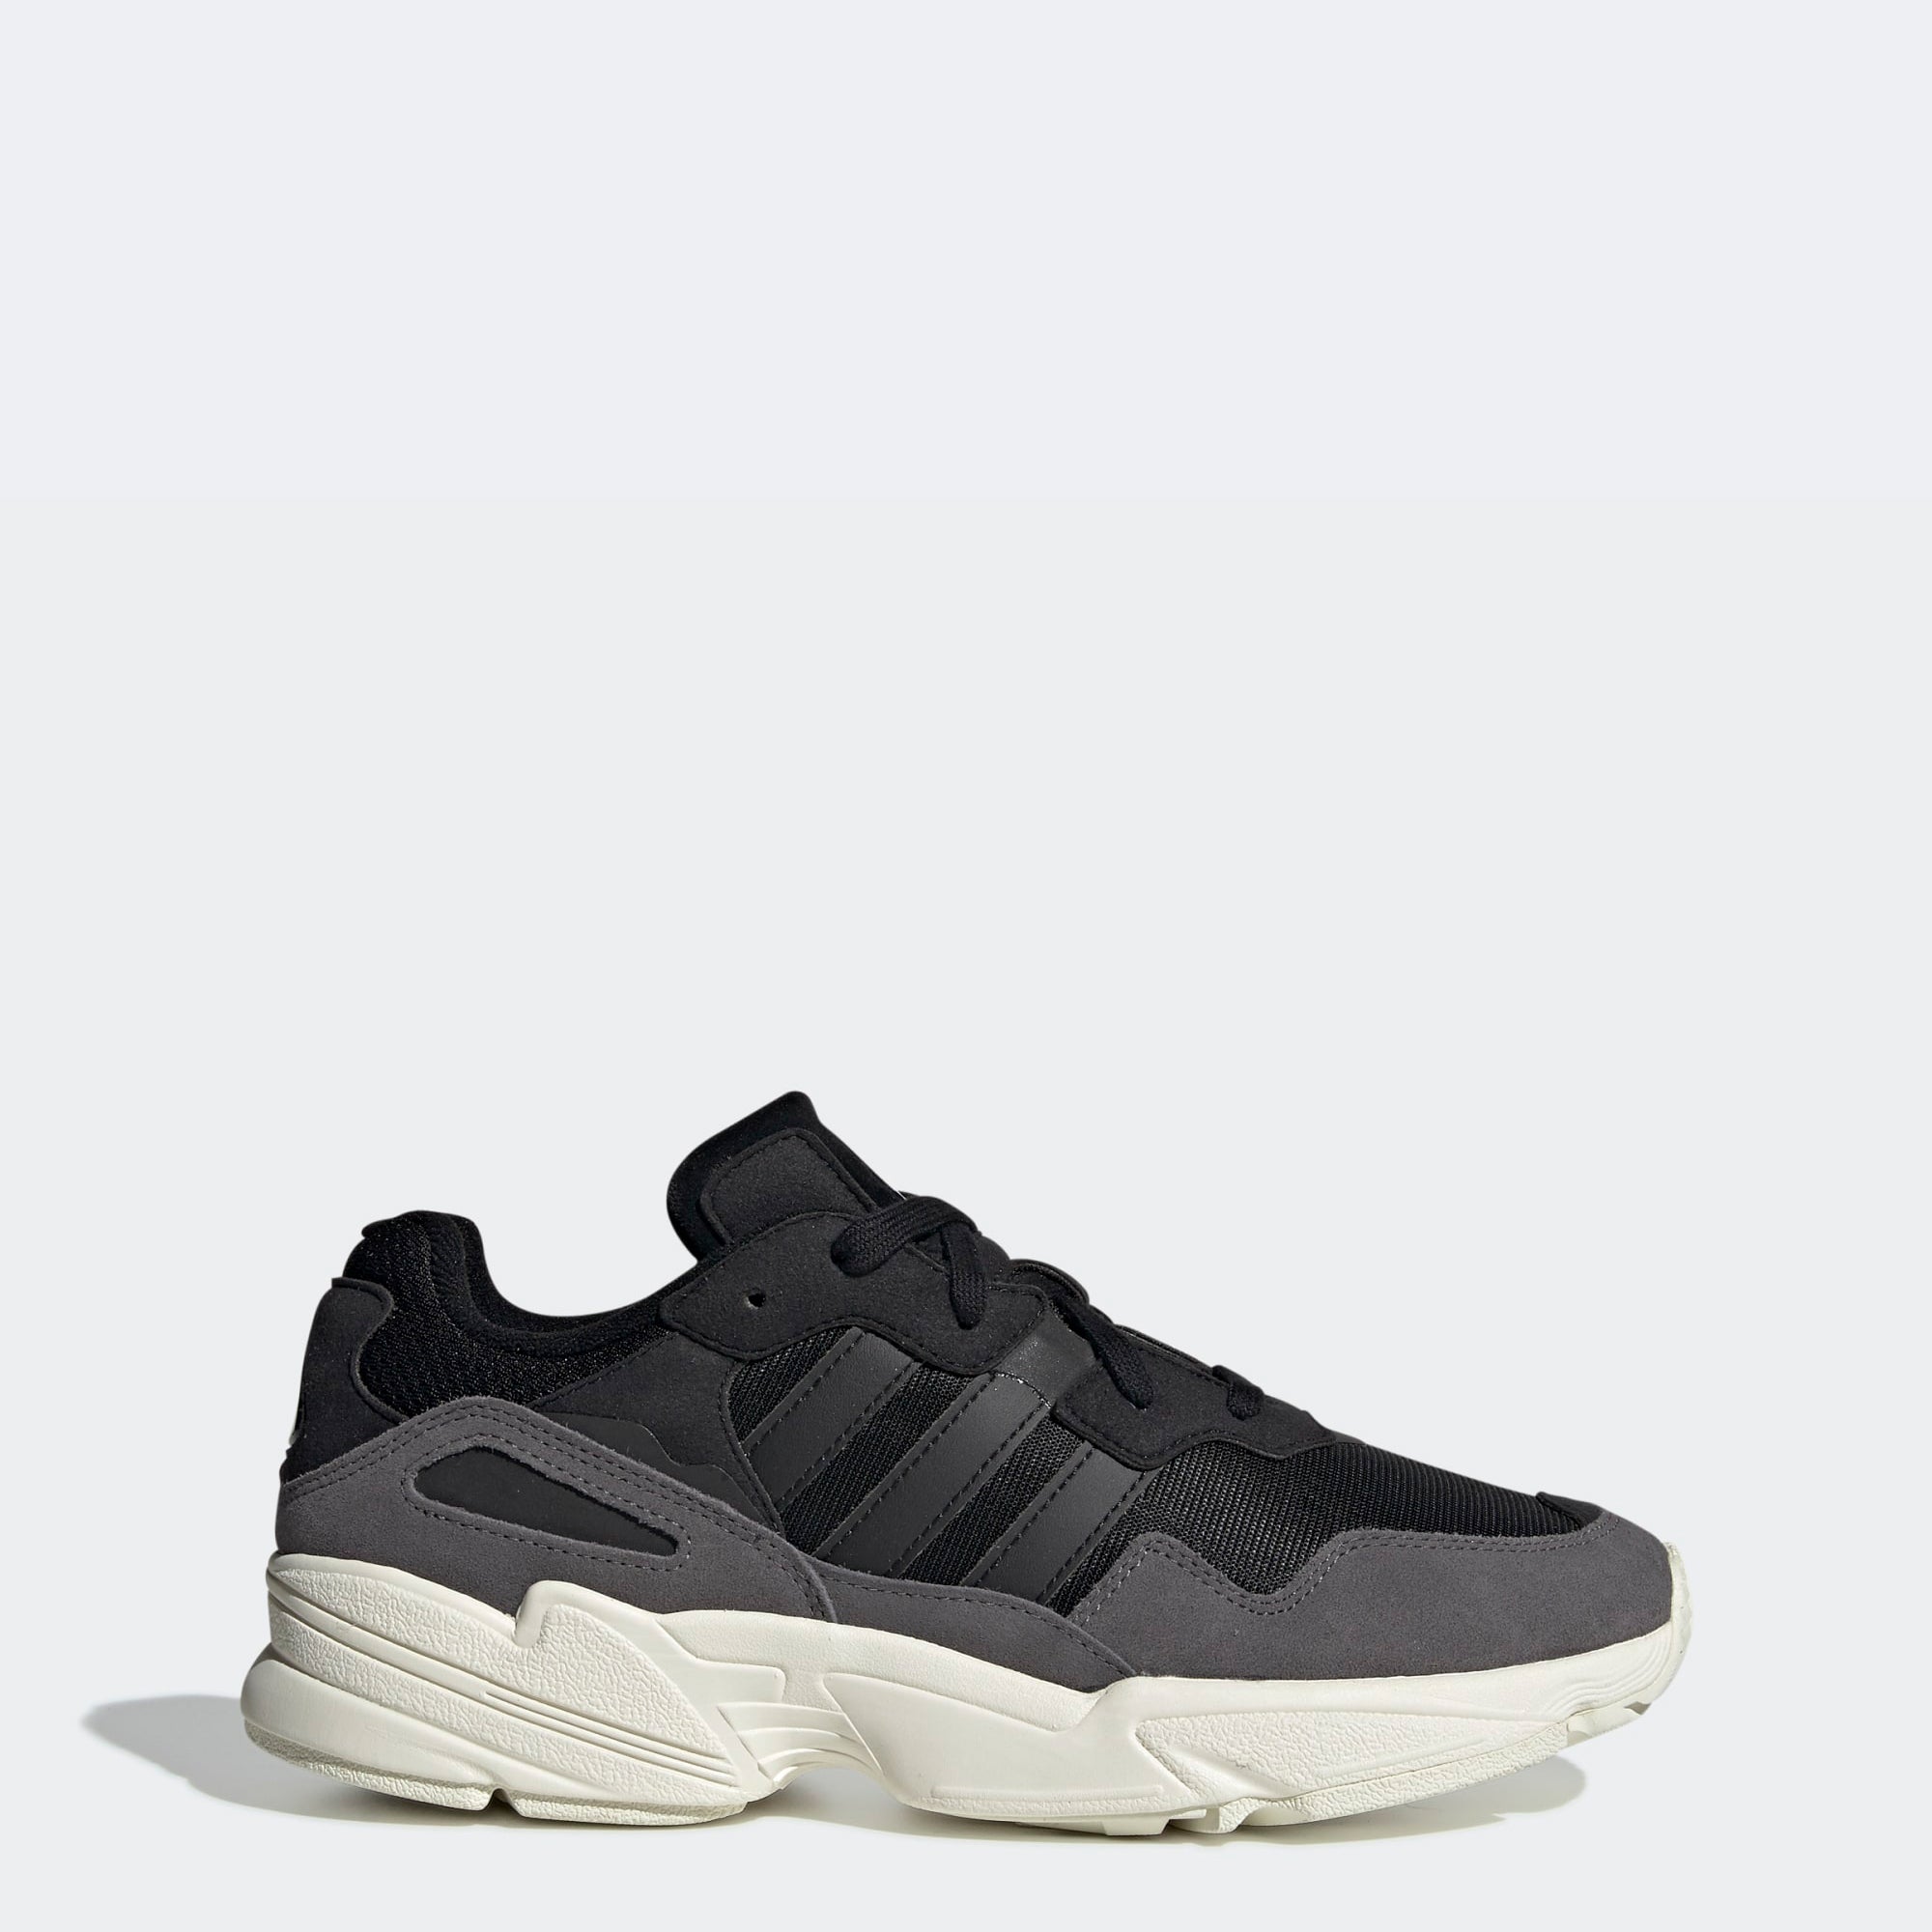 Adidas Yung 96 Shoes Black Ee7245 Chicago City Sports